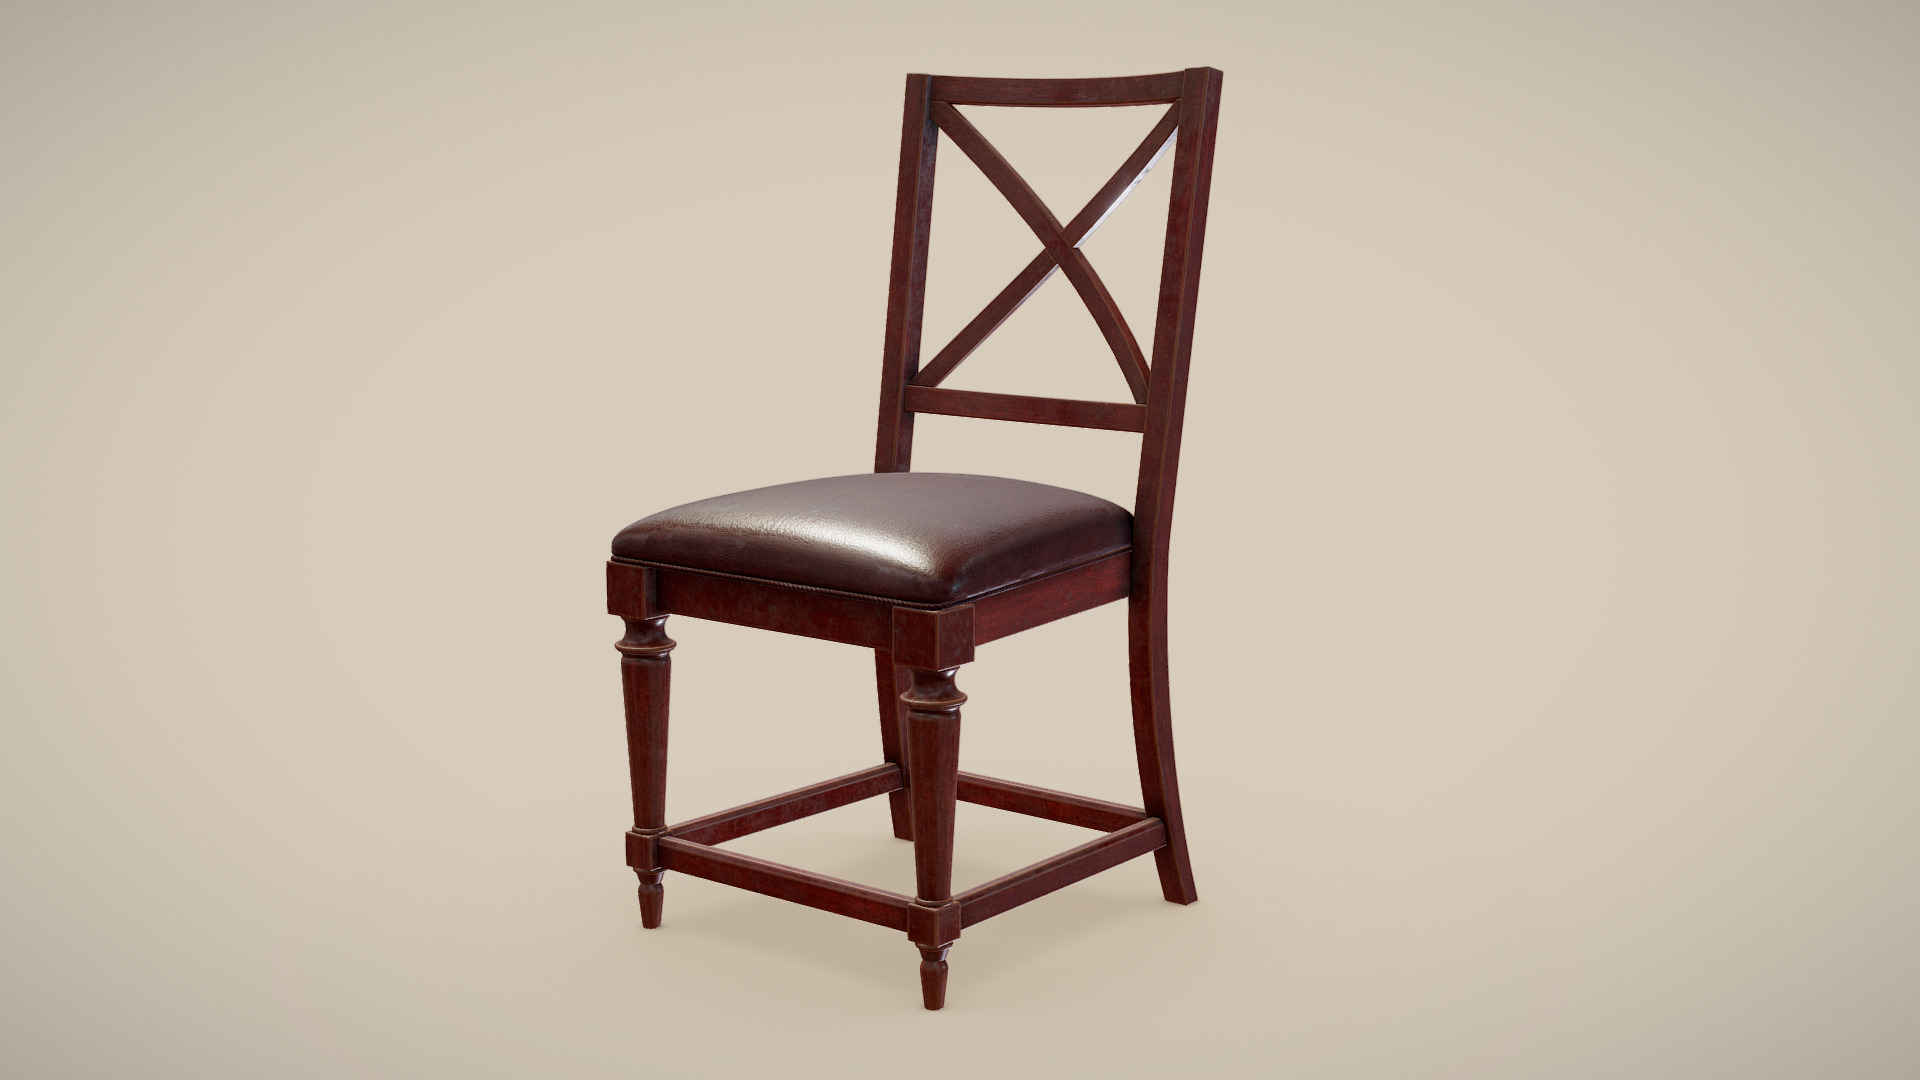 3D model Cary Chair - This is a 3D model of the Cary Chair. The 3D model is about a wooden chair against a white background.